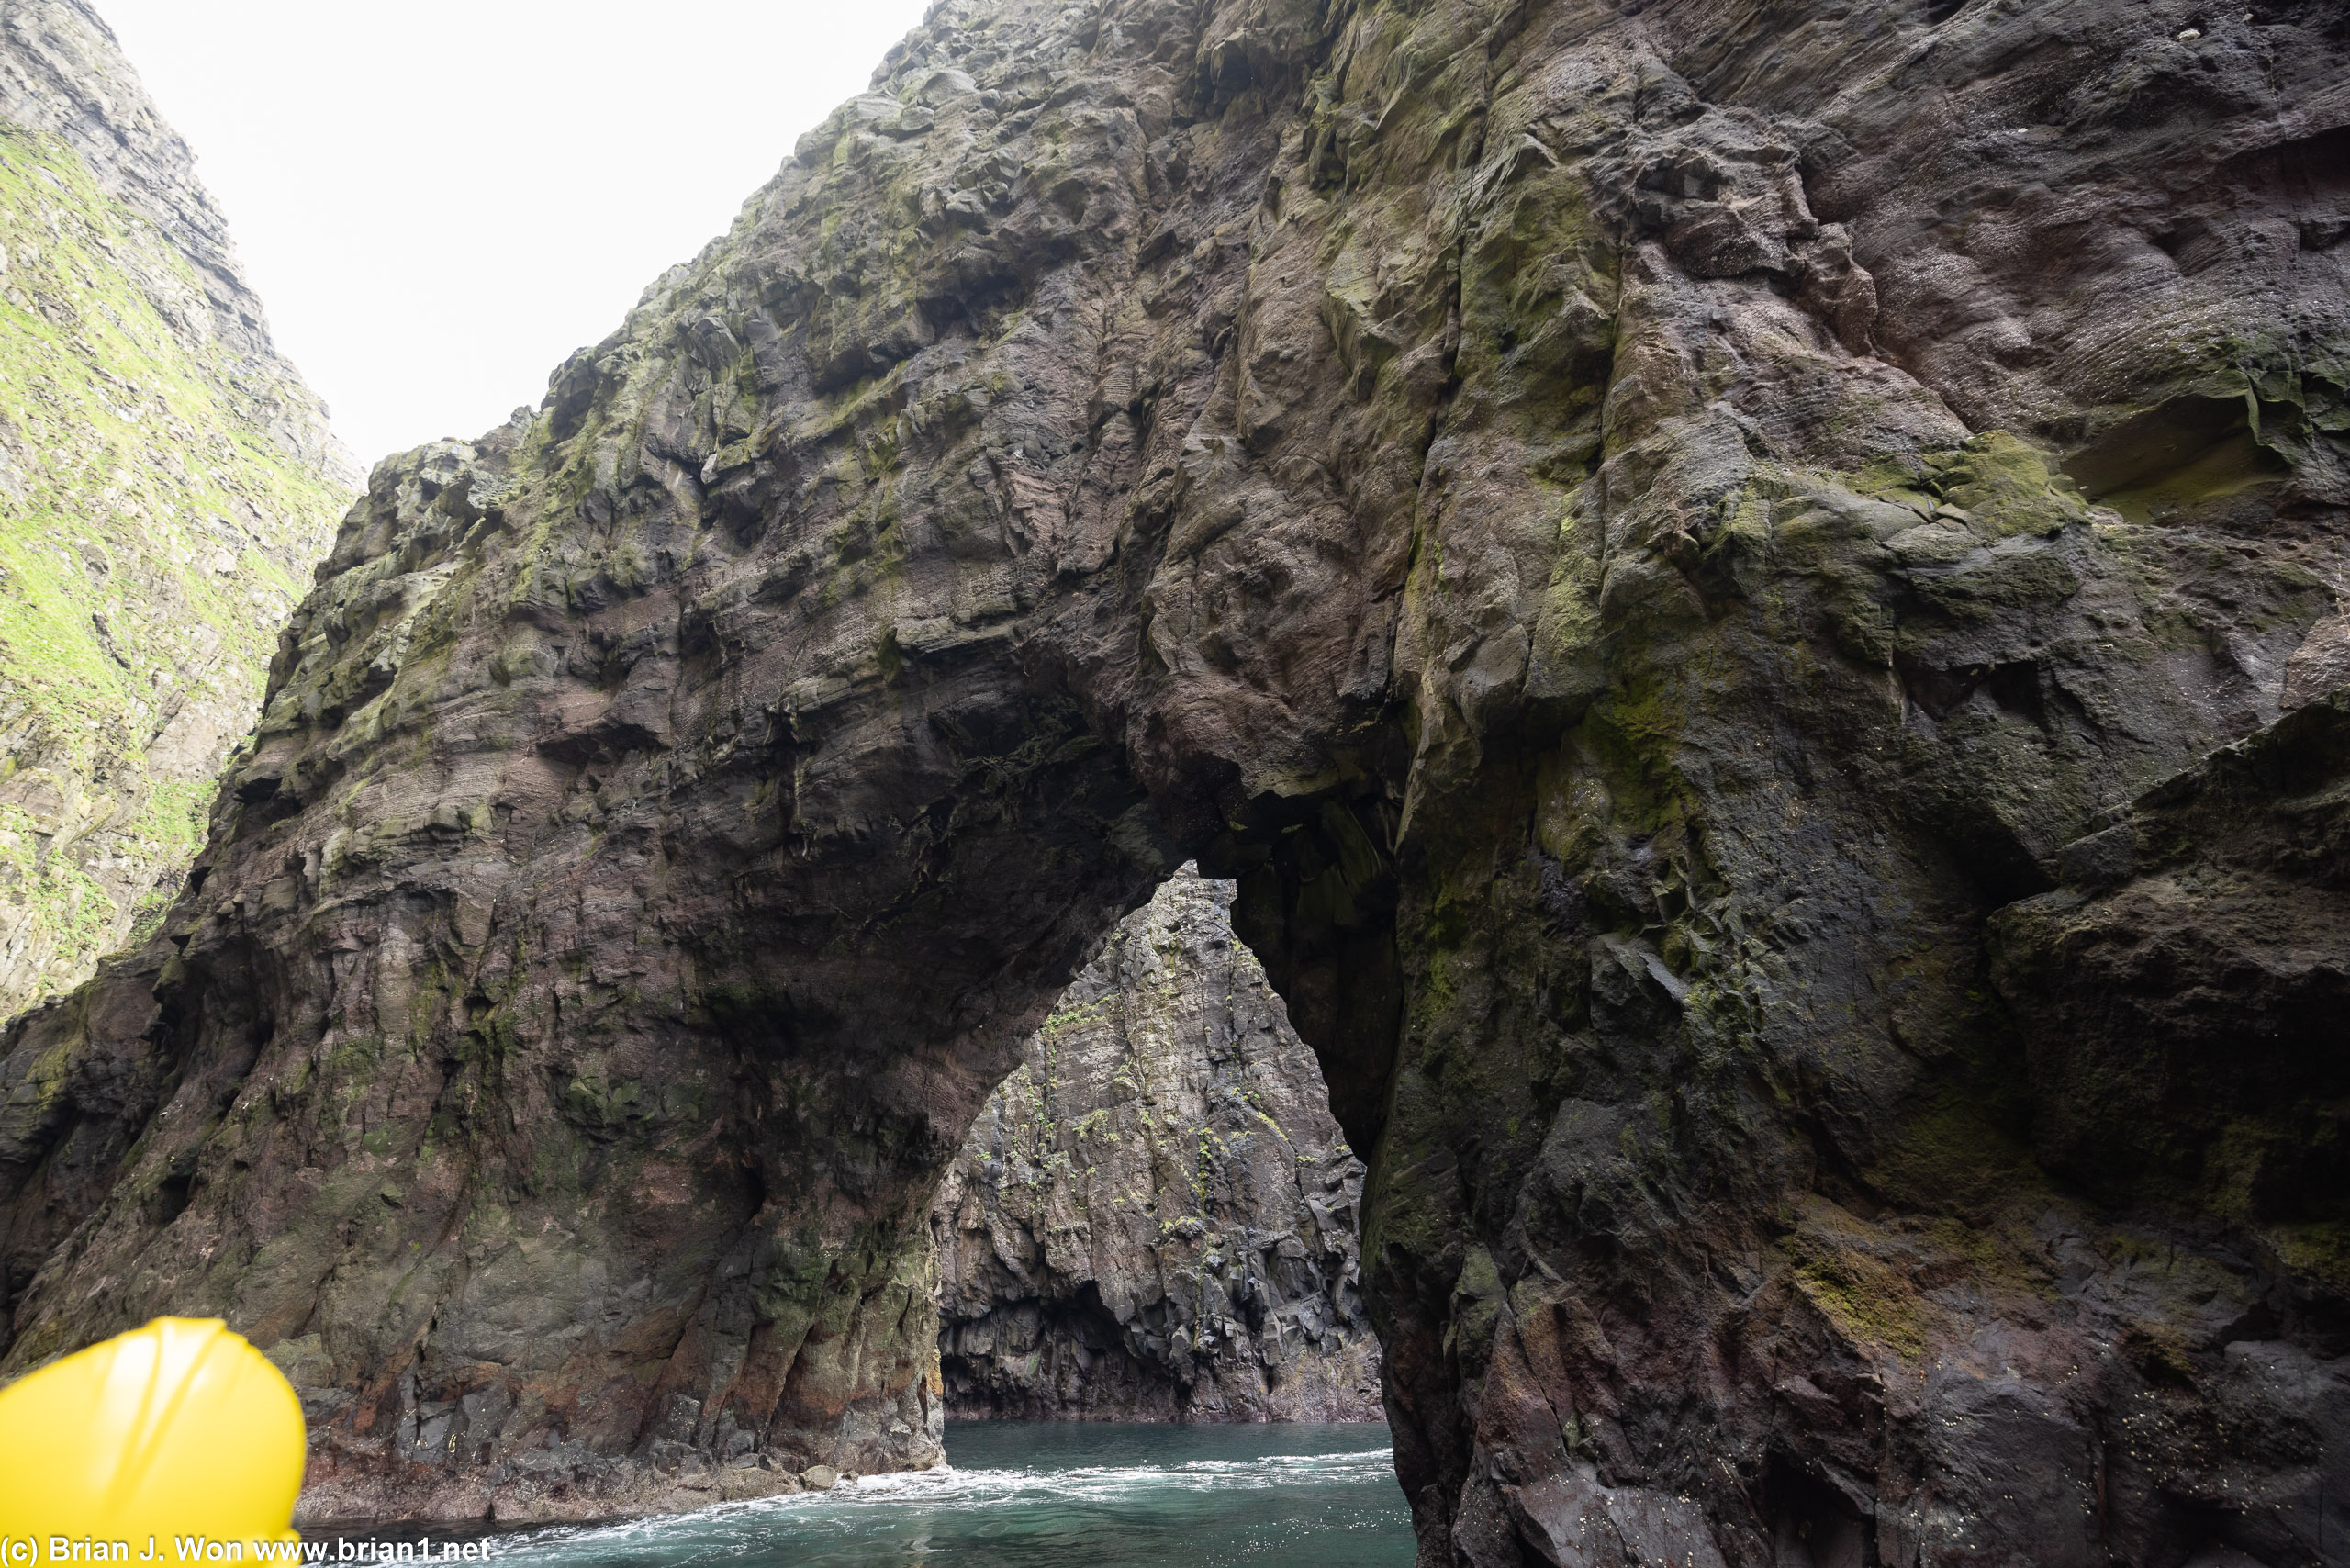 Cruised through quite a few watery arches.